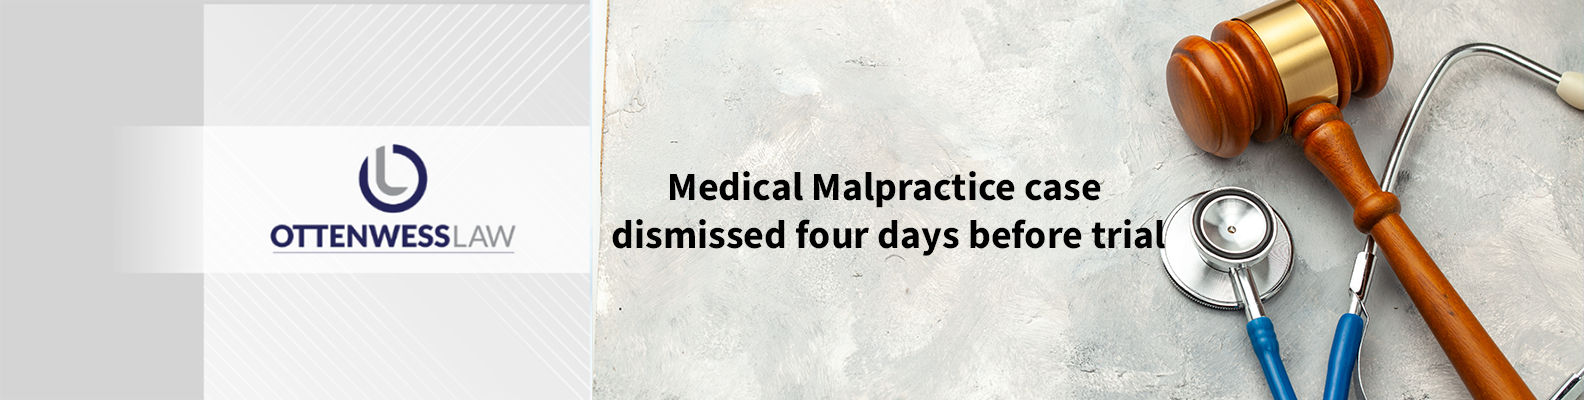 Medical Malpractice case dismissed four days before trial